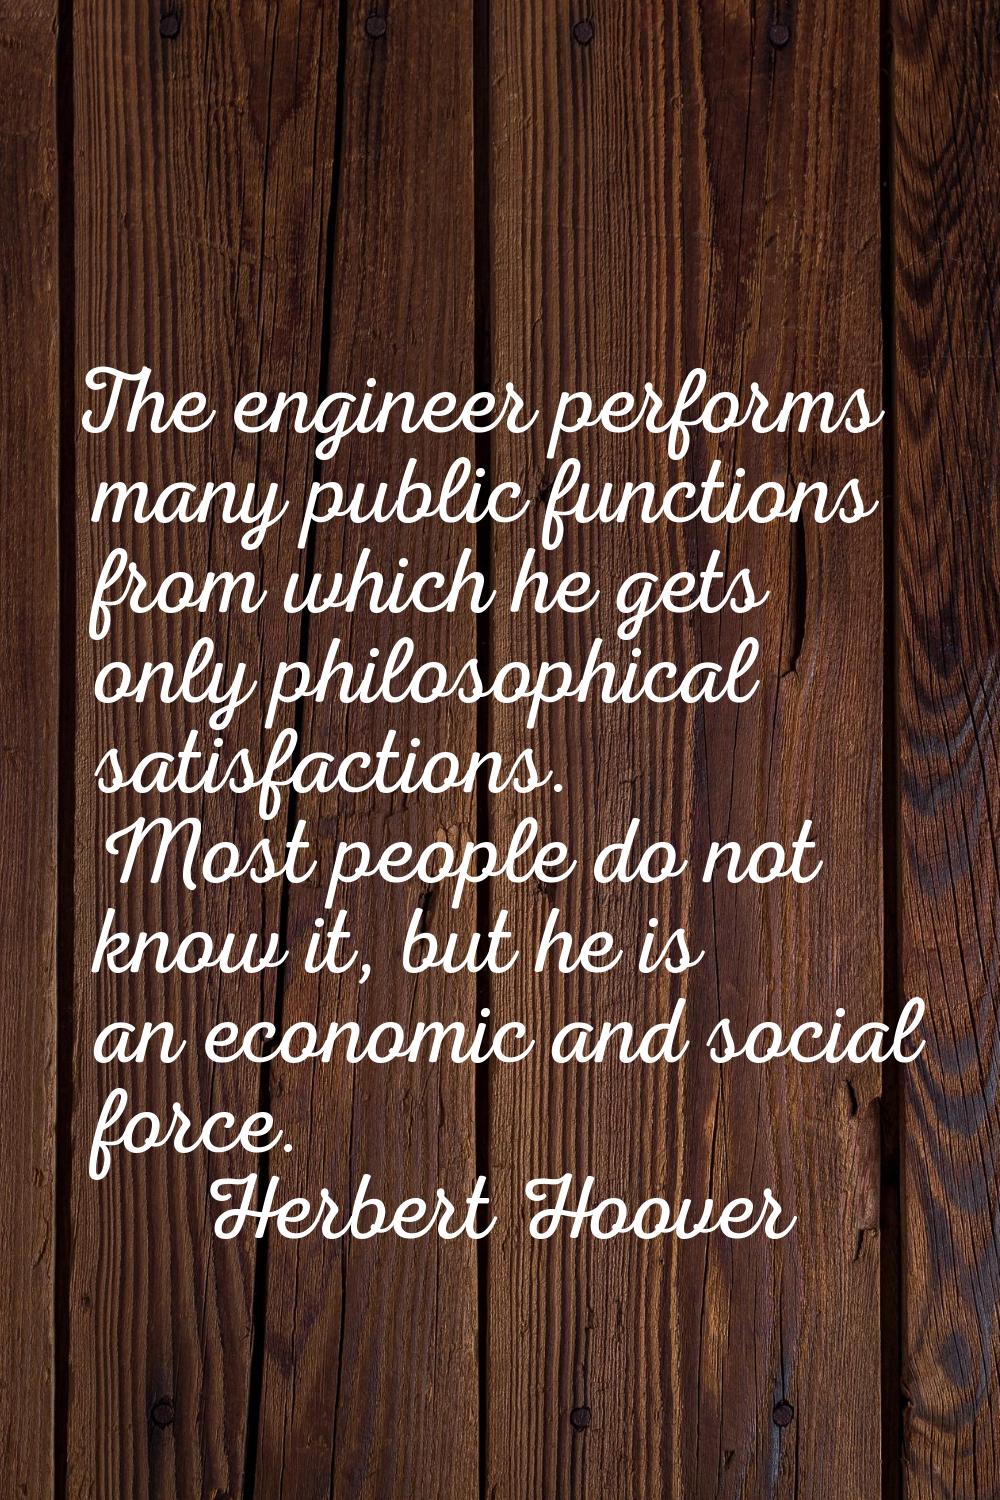 The engineer performs many public functions from which he gets only philosophical satisfactions. Mo